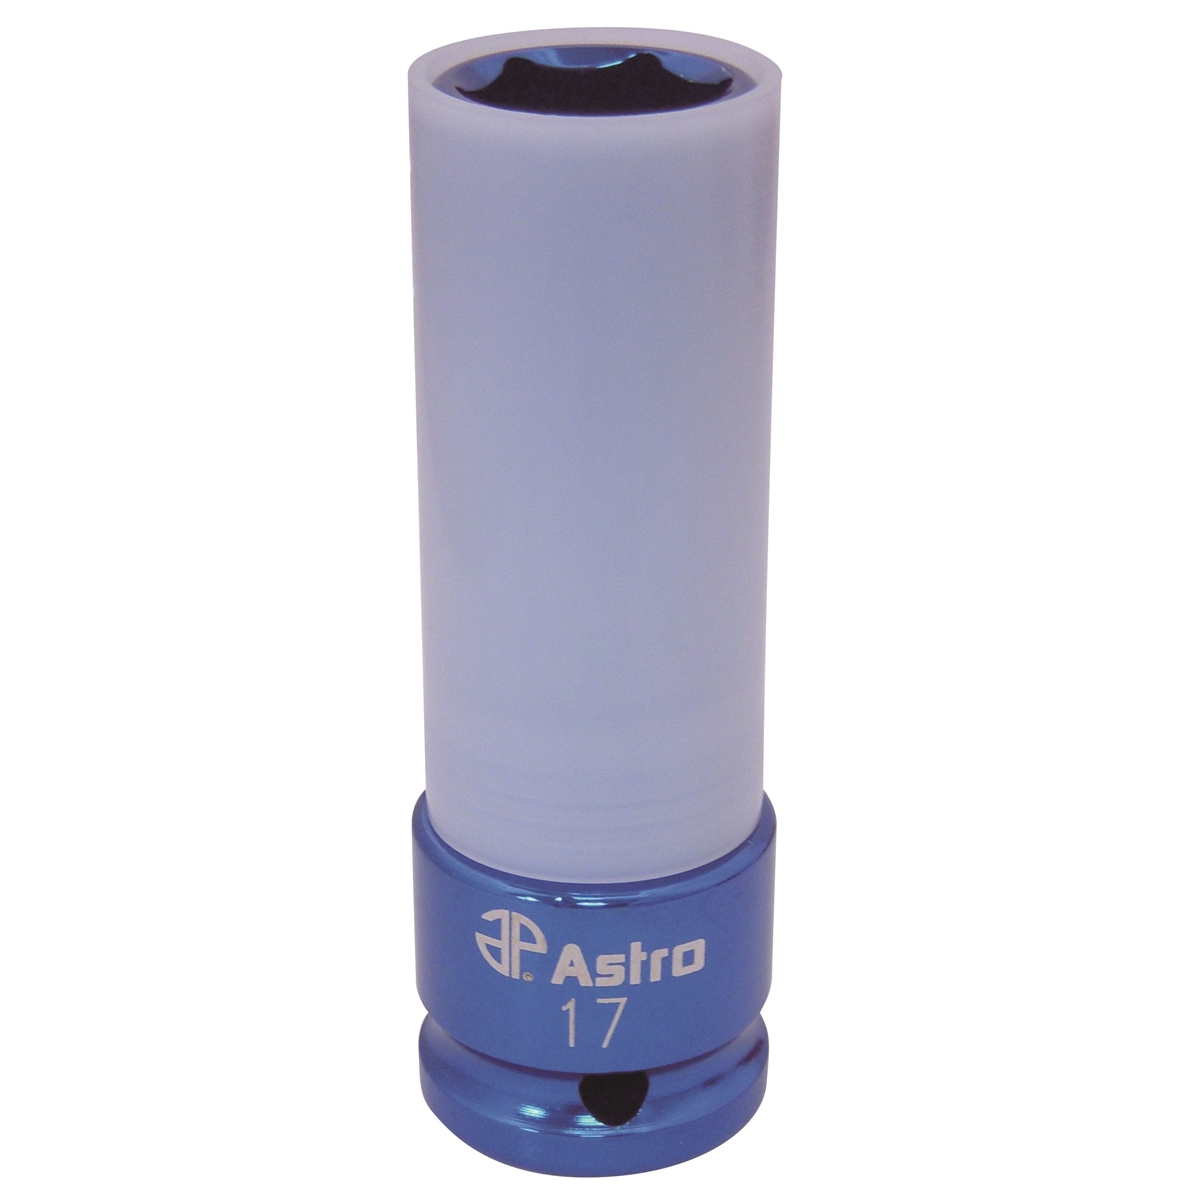 Astro Pneumatic Ast7870-17 17mm Impact Socket With Chrome Protective Plastic Sleeve And Shallow Broach